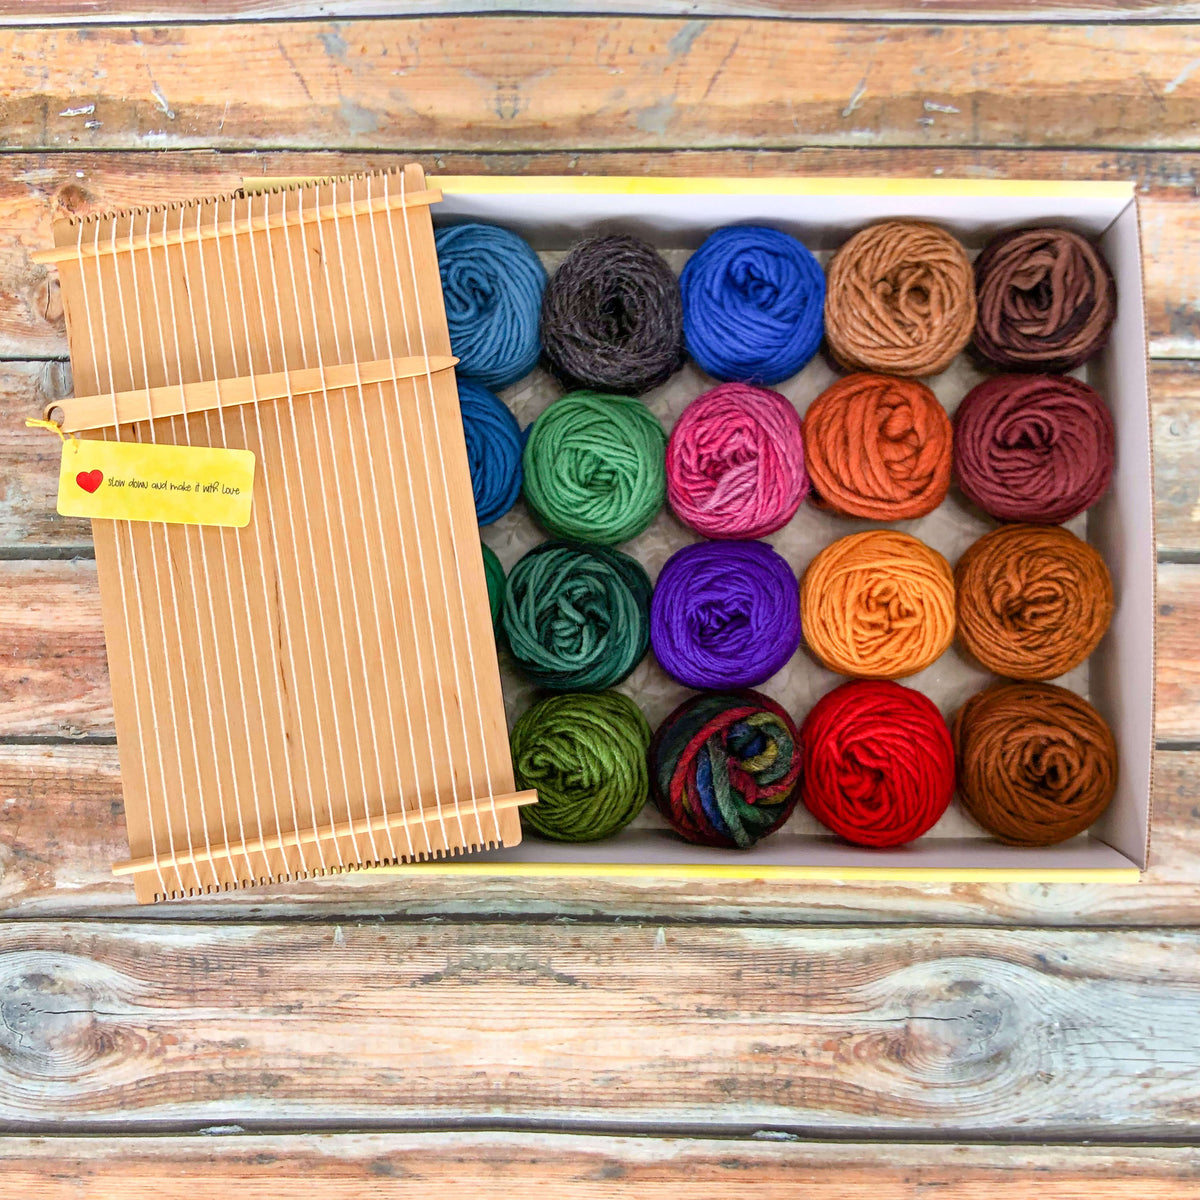 Wool Yarn Kit - Colors of the Rainforest